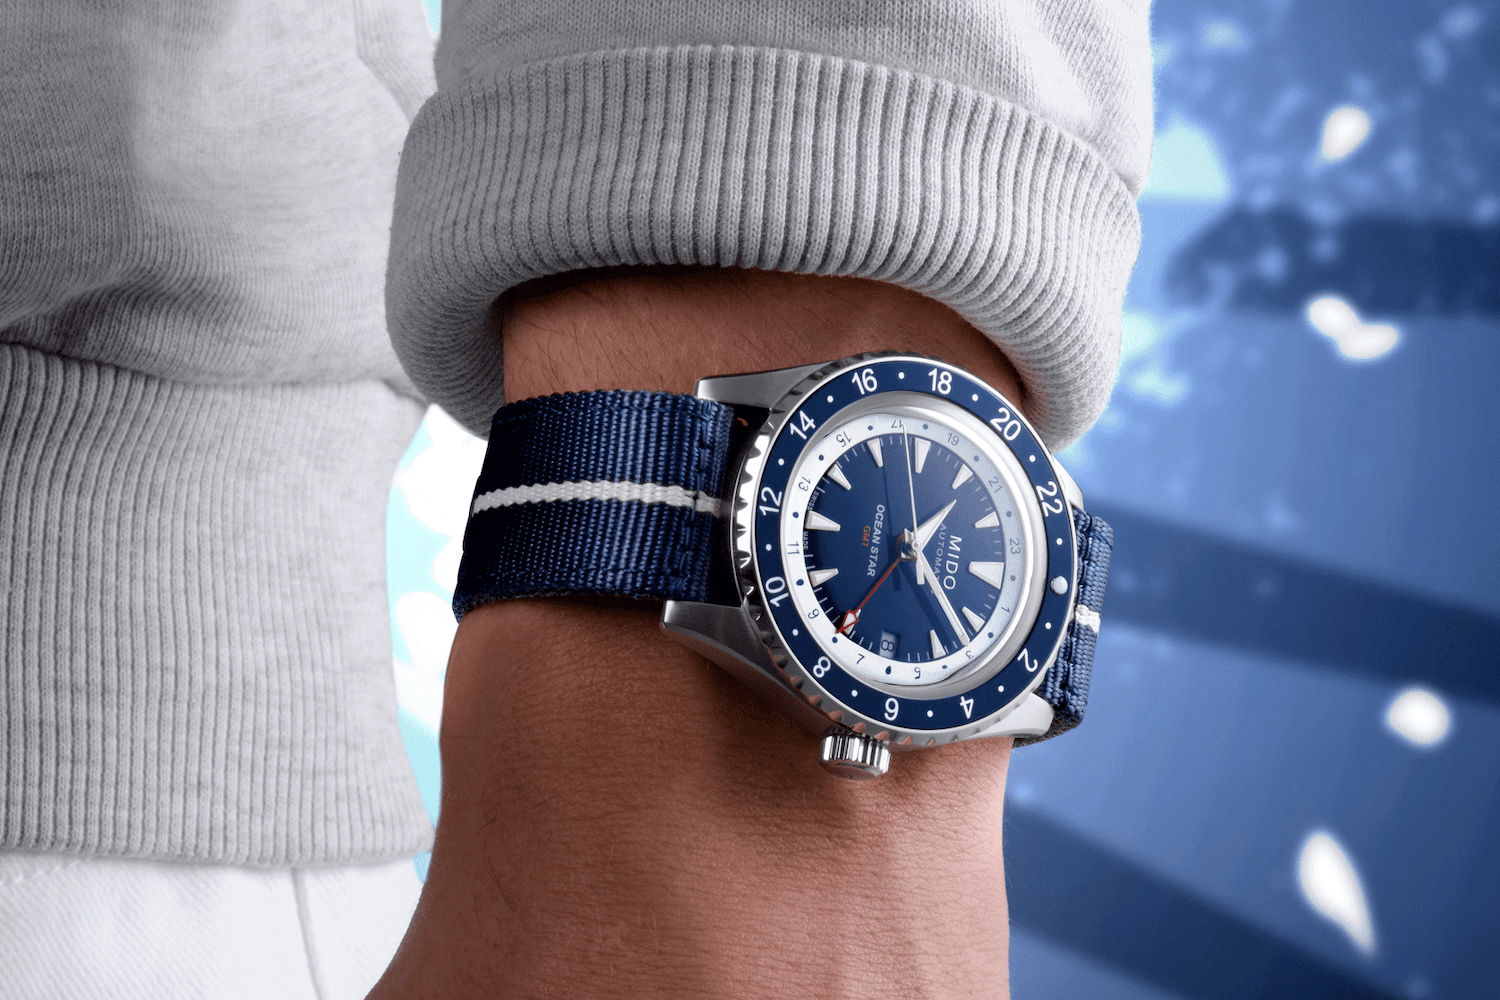 Mido's Ocean Star GMT, featuring 200m water resistance and available in four different colorways